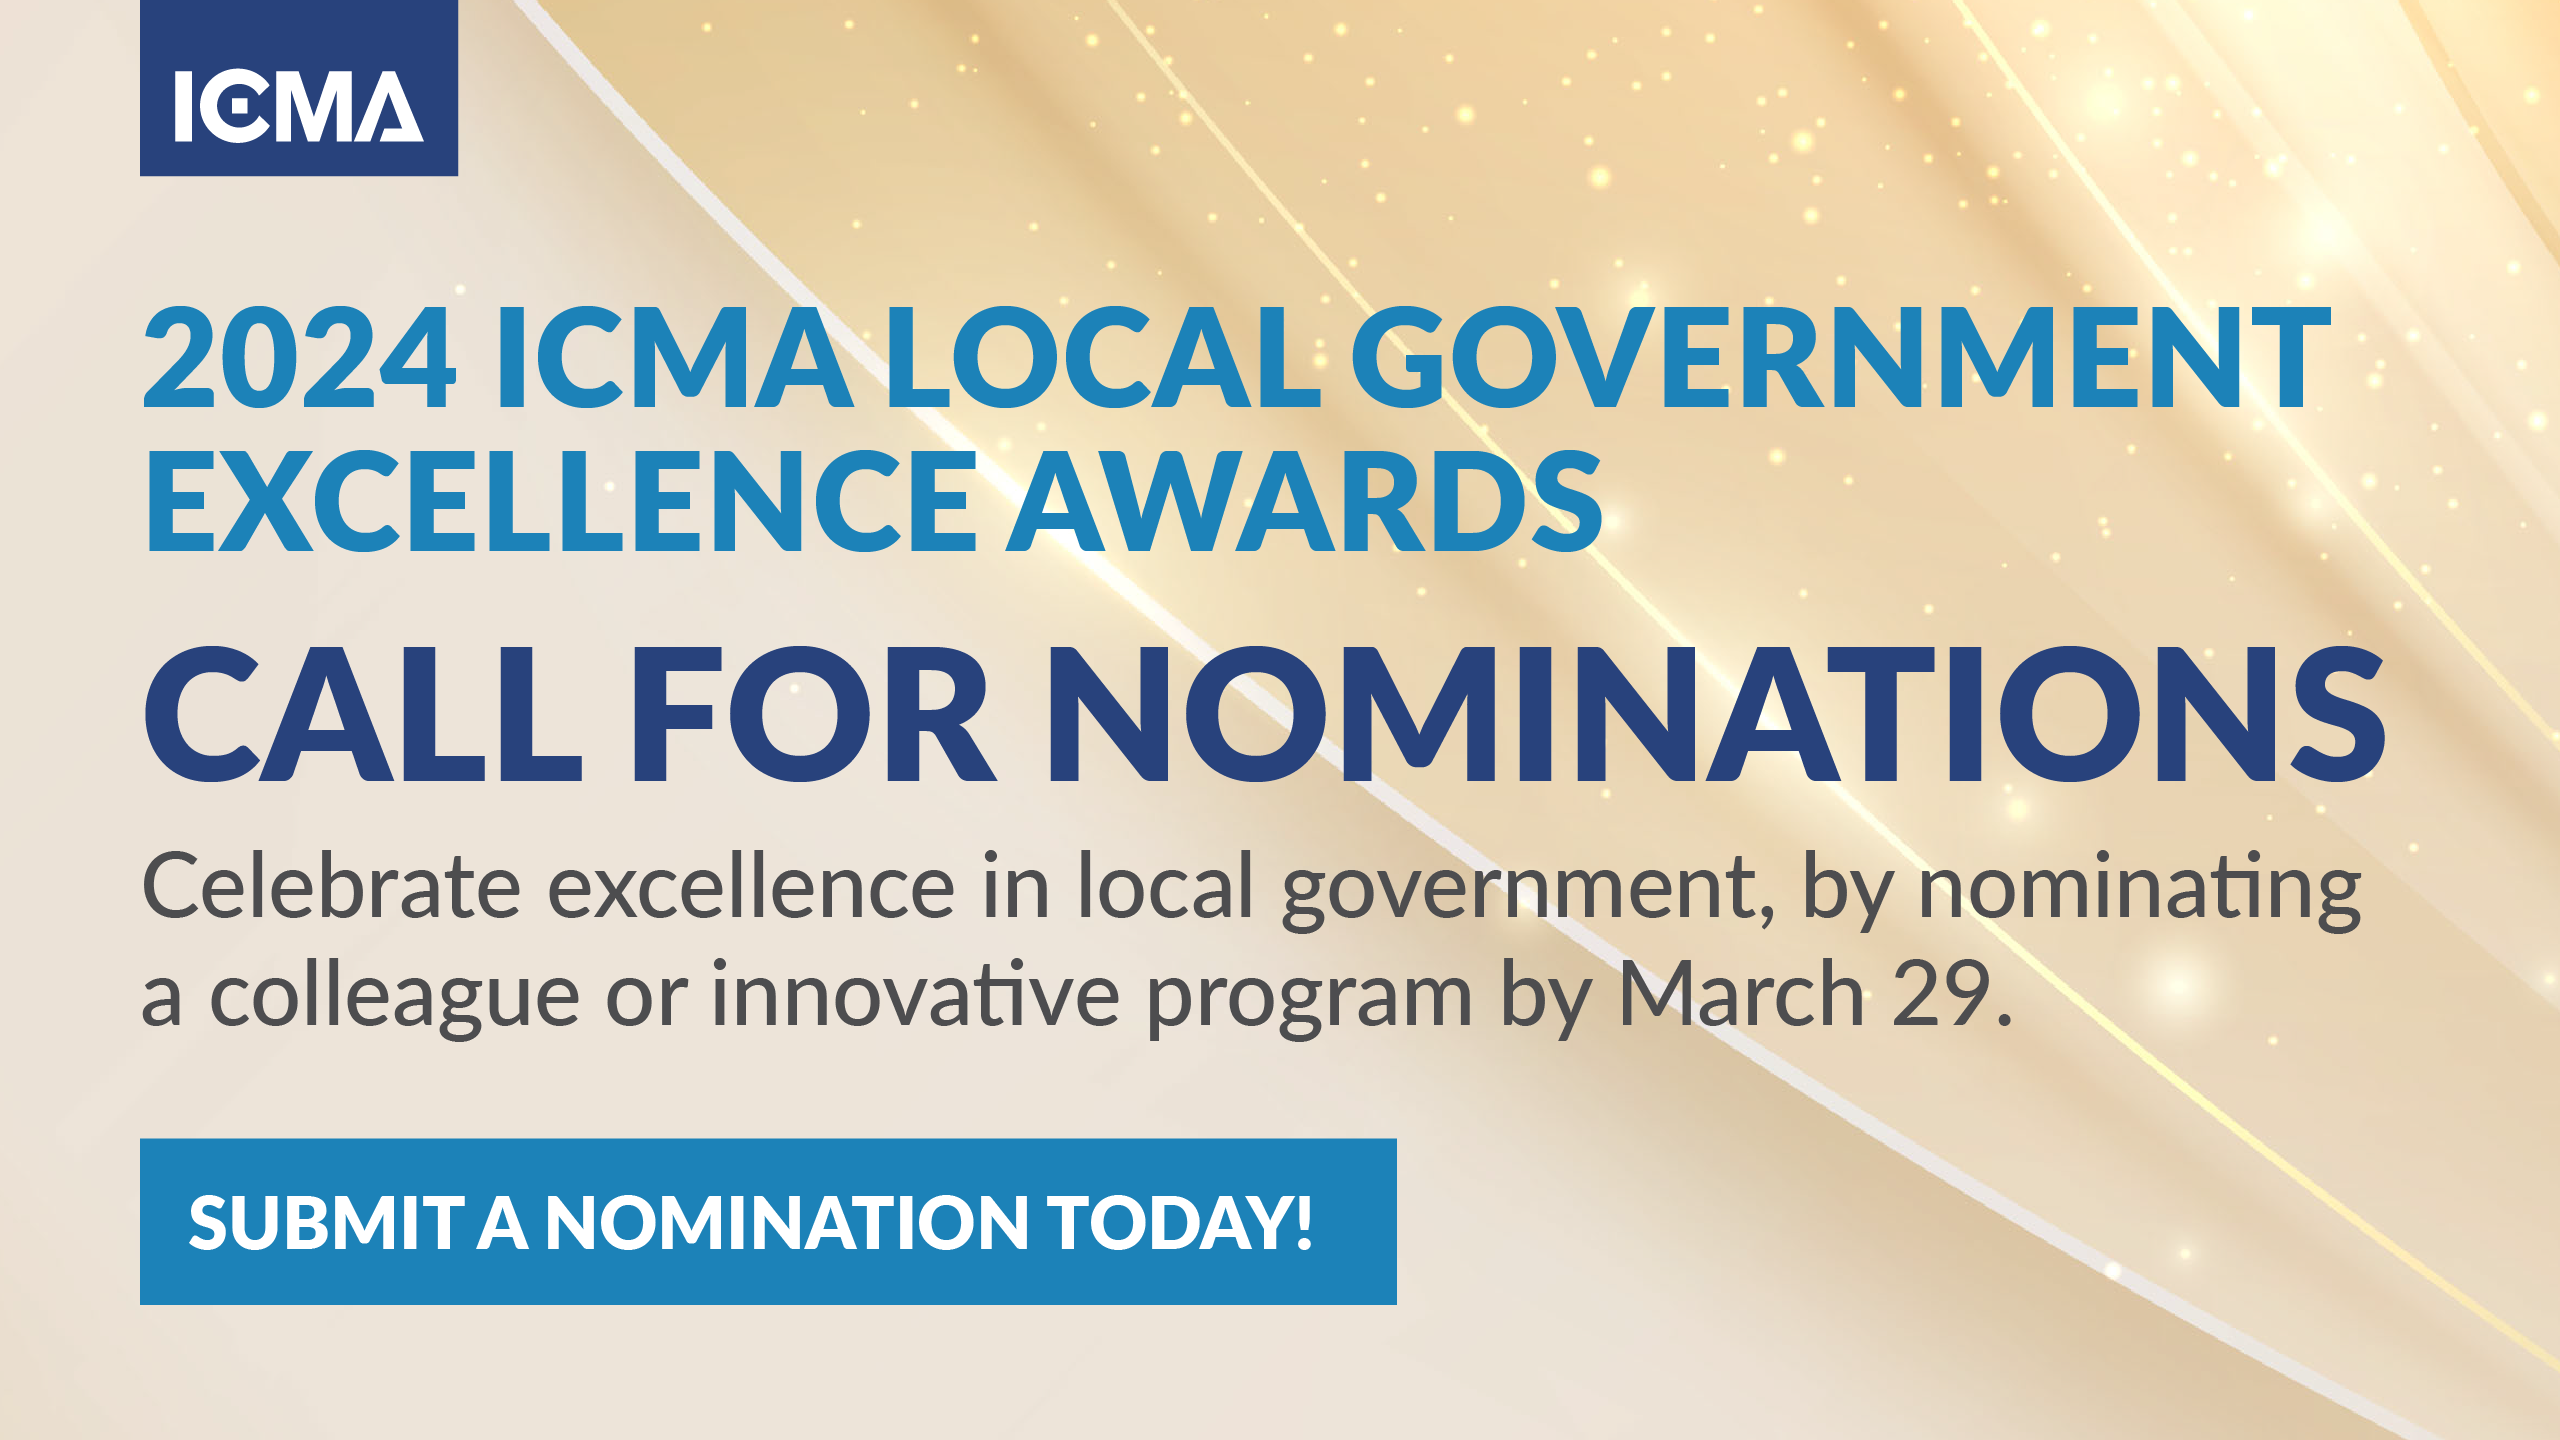 Nominations for ICMA Local Government Excellence Awards Closing